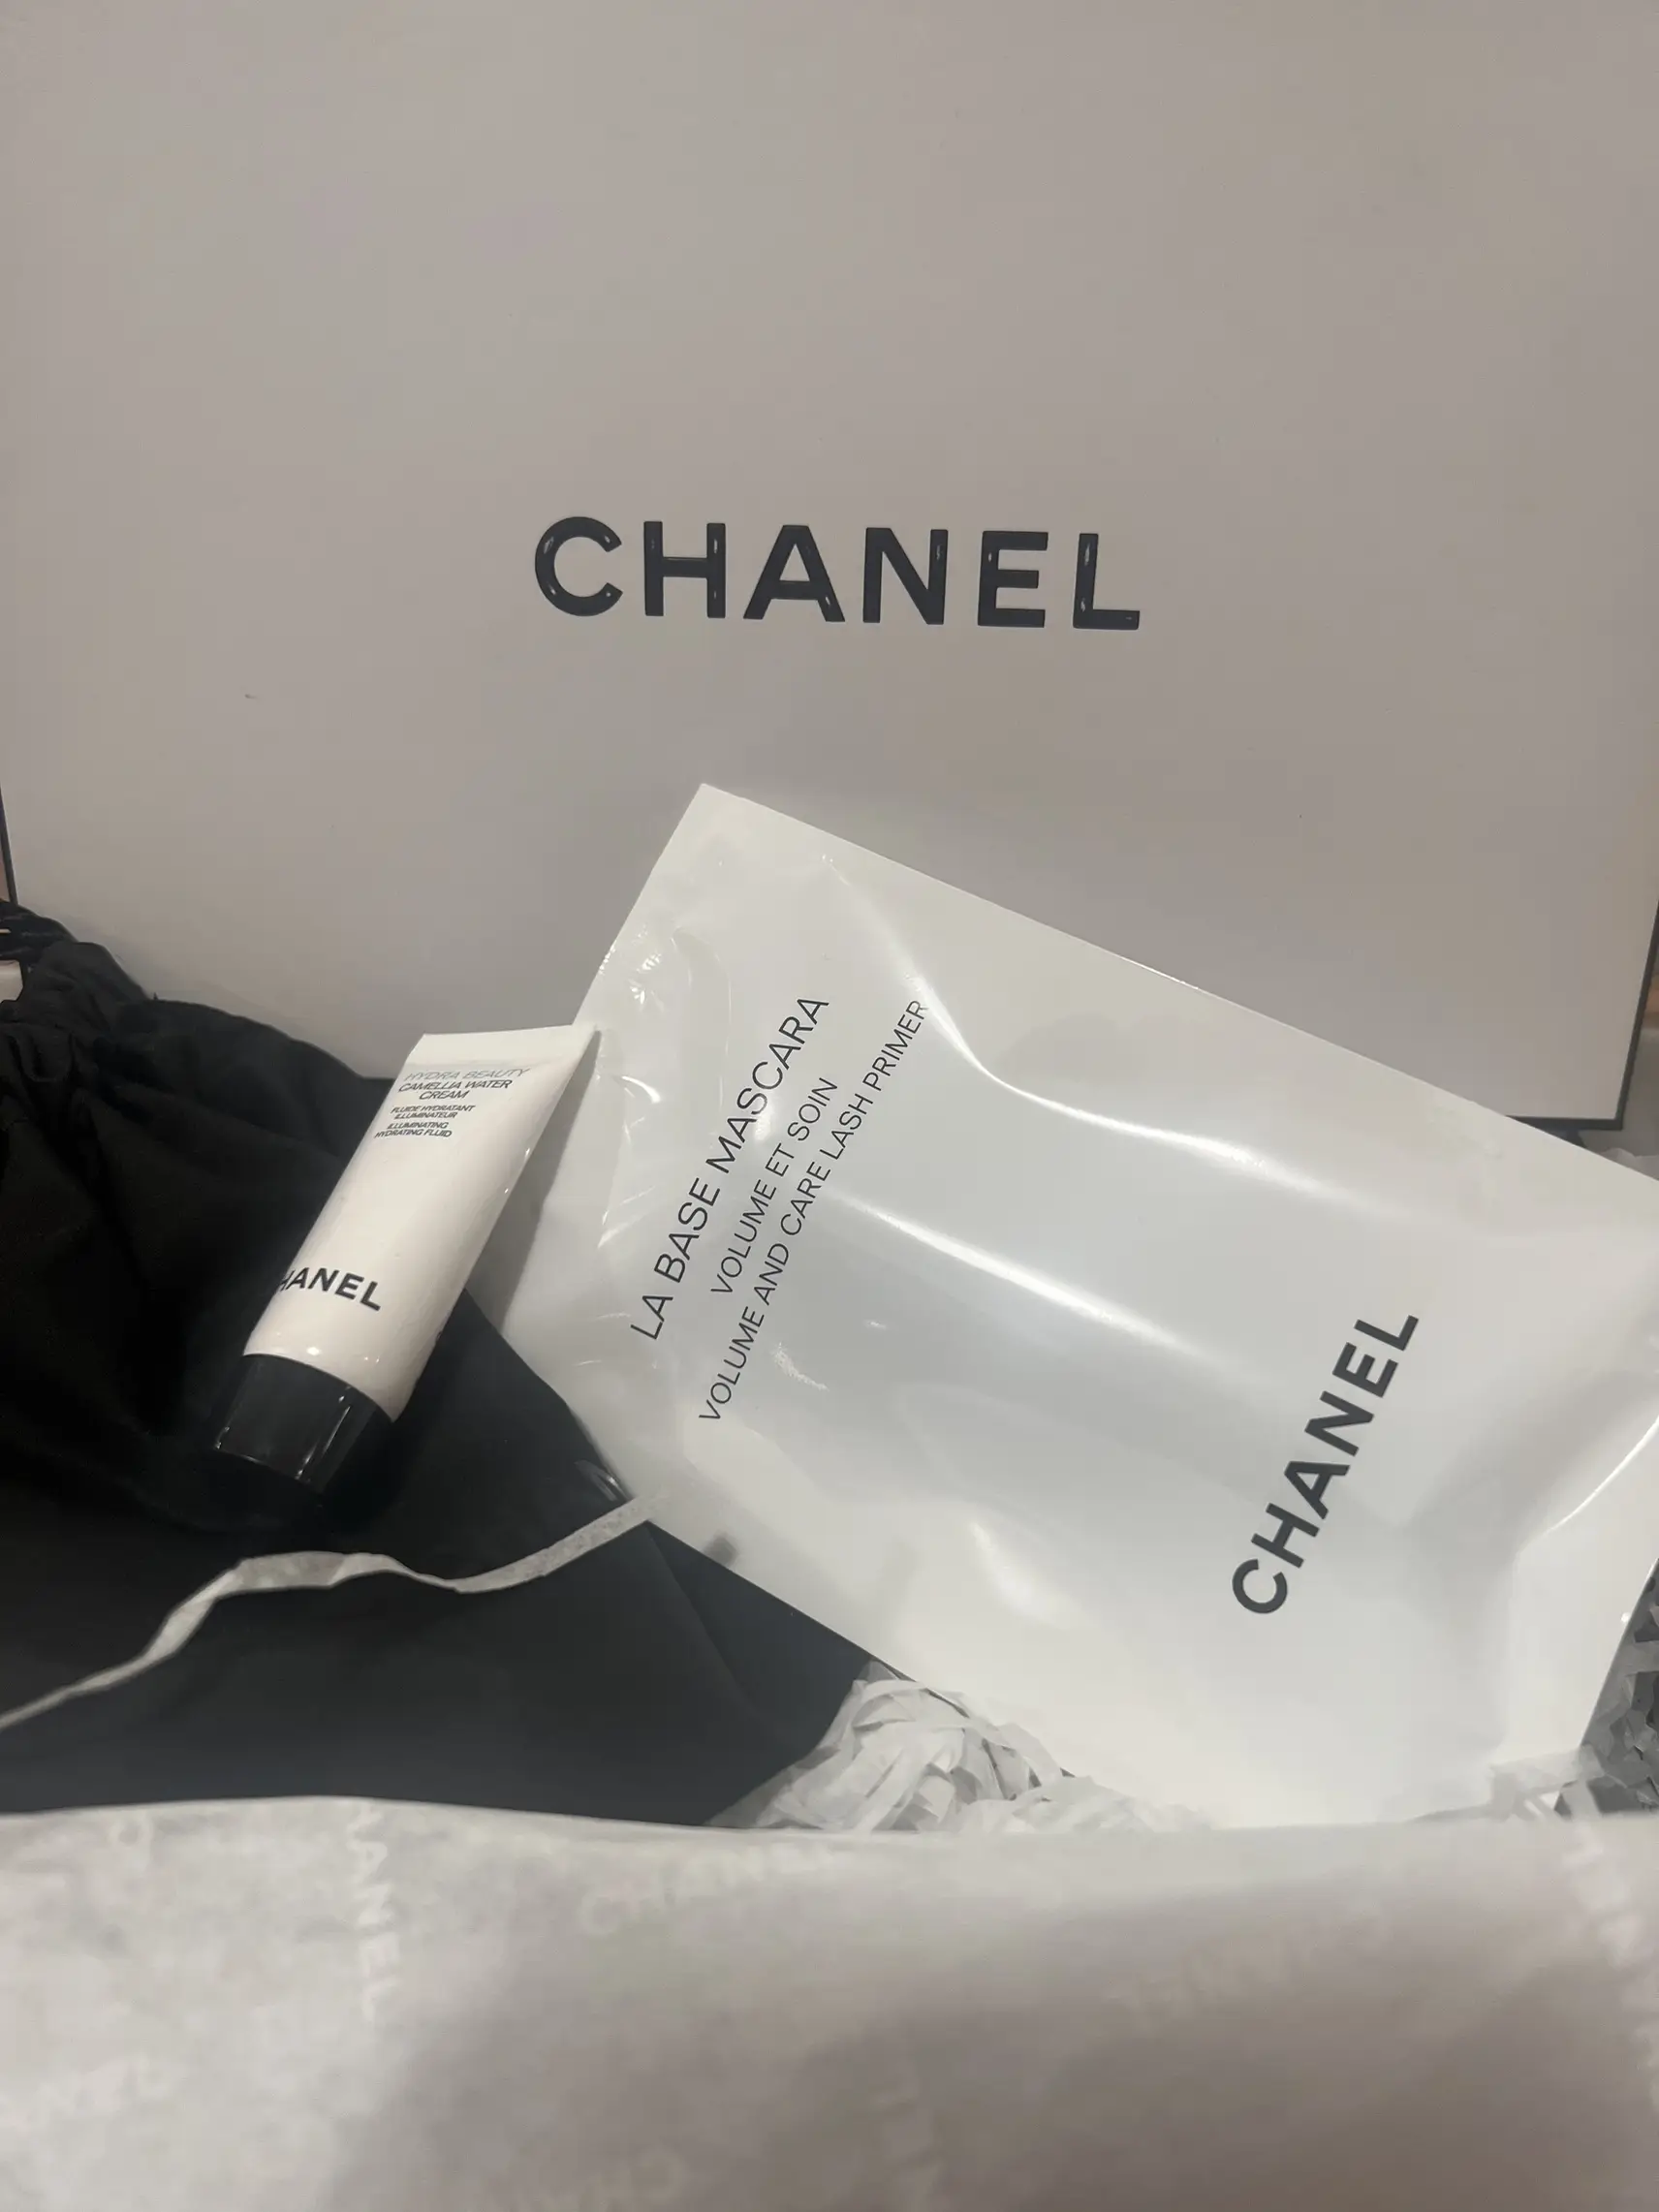 Chanel Free Samples, Gallery posted by Bossladydiary